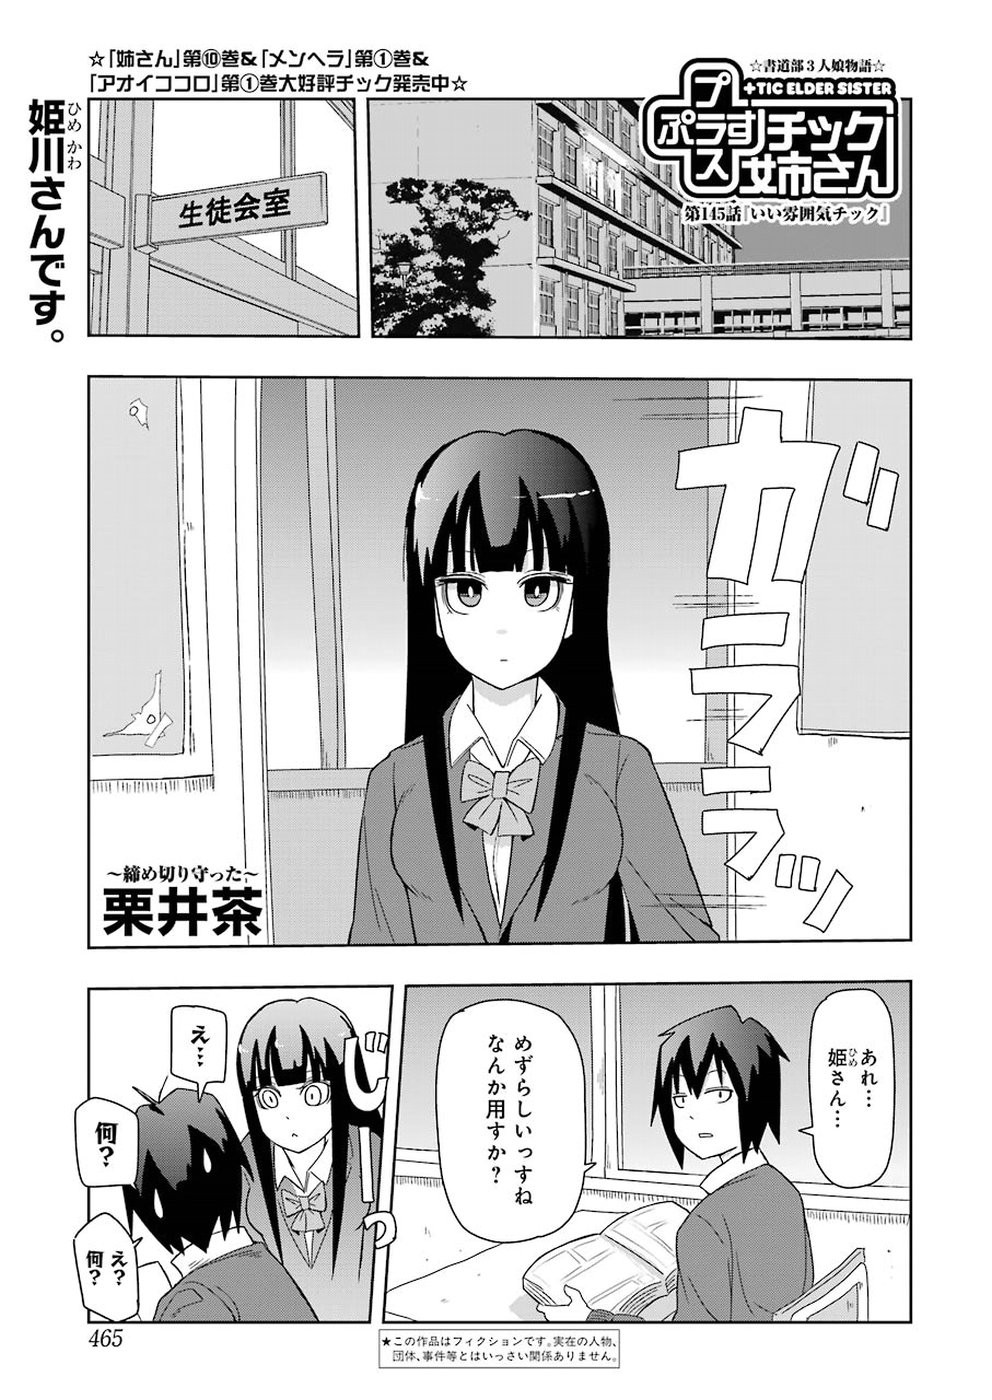 + Tic Nee-san - Chapter 145 - Page 1